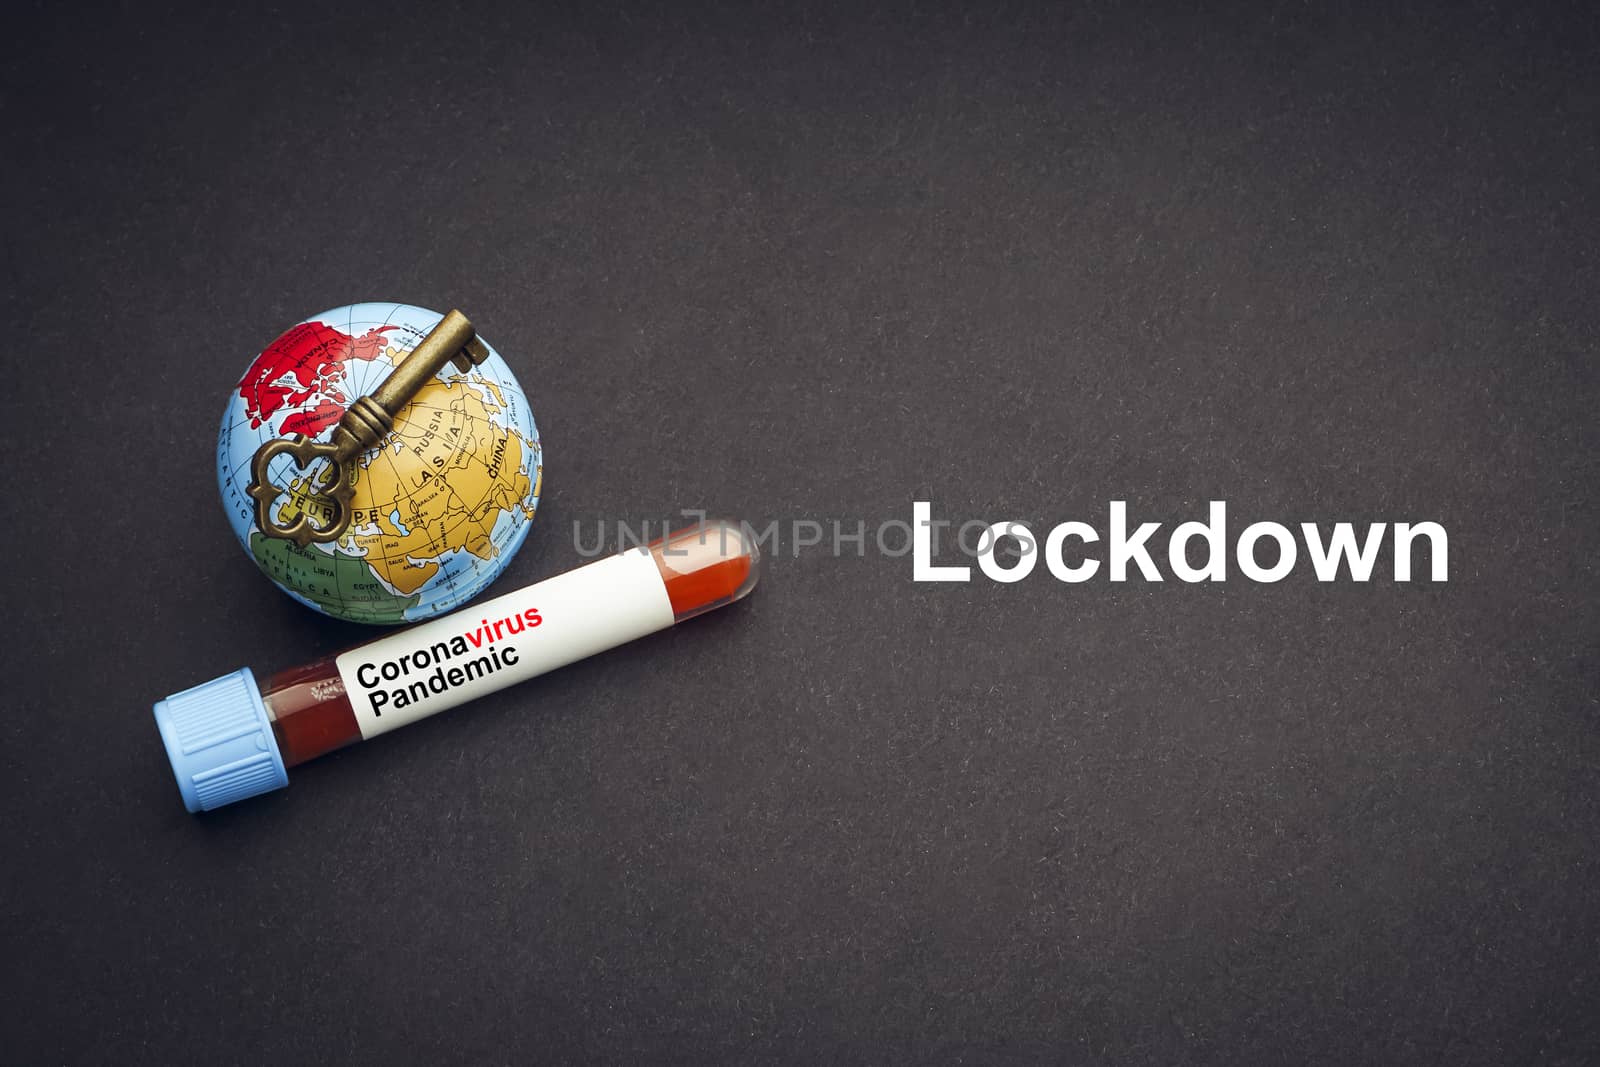 CORONAVIRUS LOCKDOWN text with world globe, key and Blood test vacuum tube on black background. by silverwings